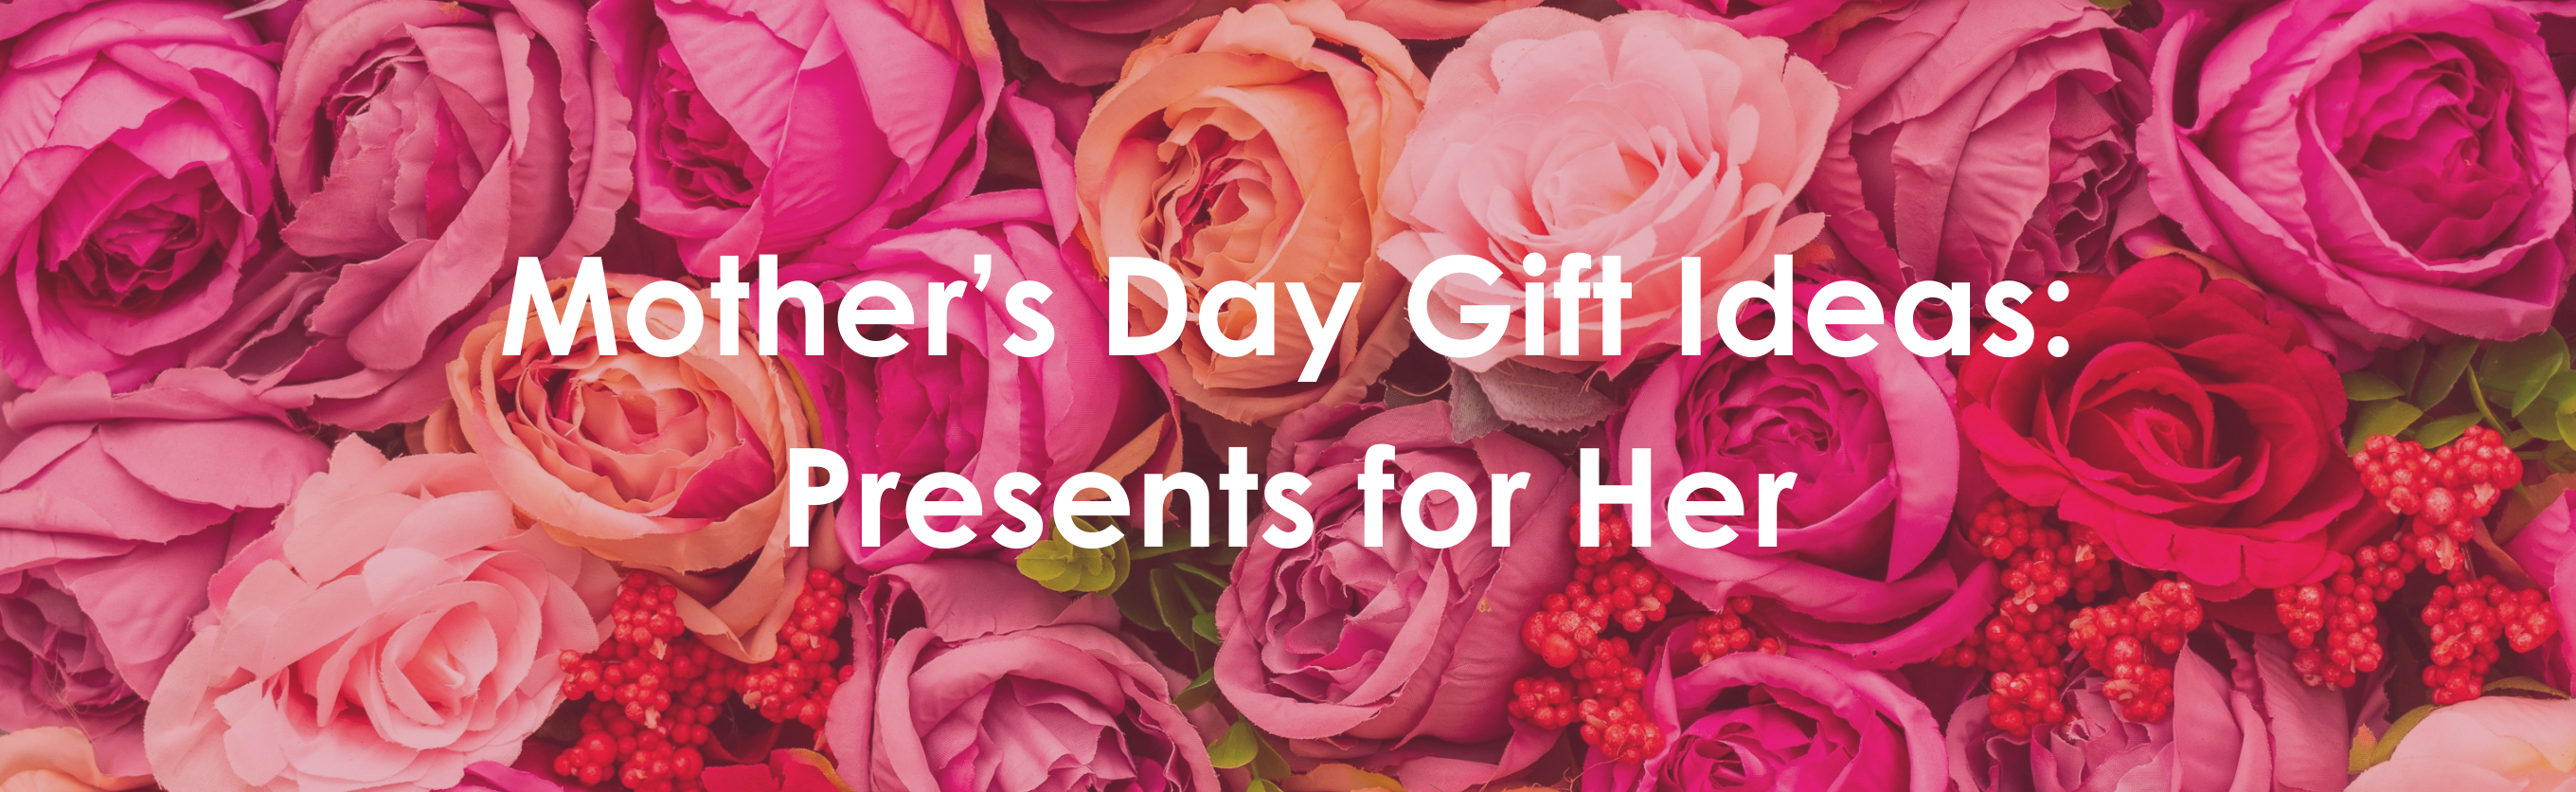 Mother’s Day Gift Ideas - Present Ideas For Her